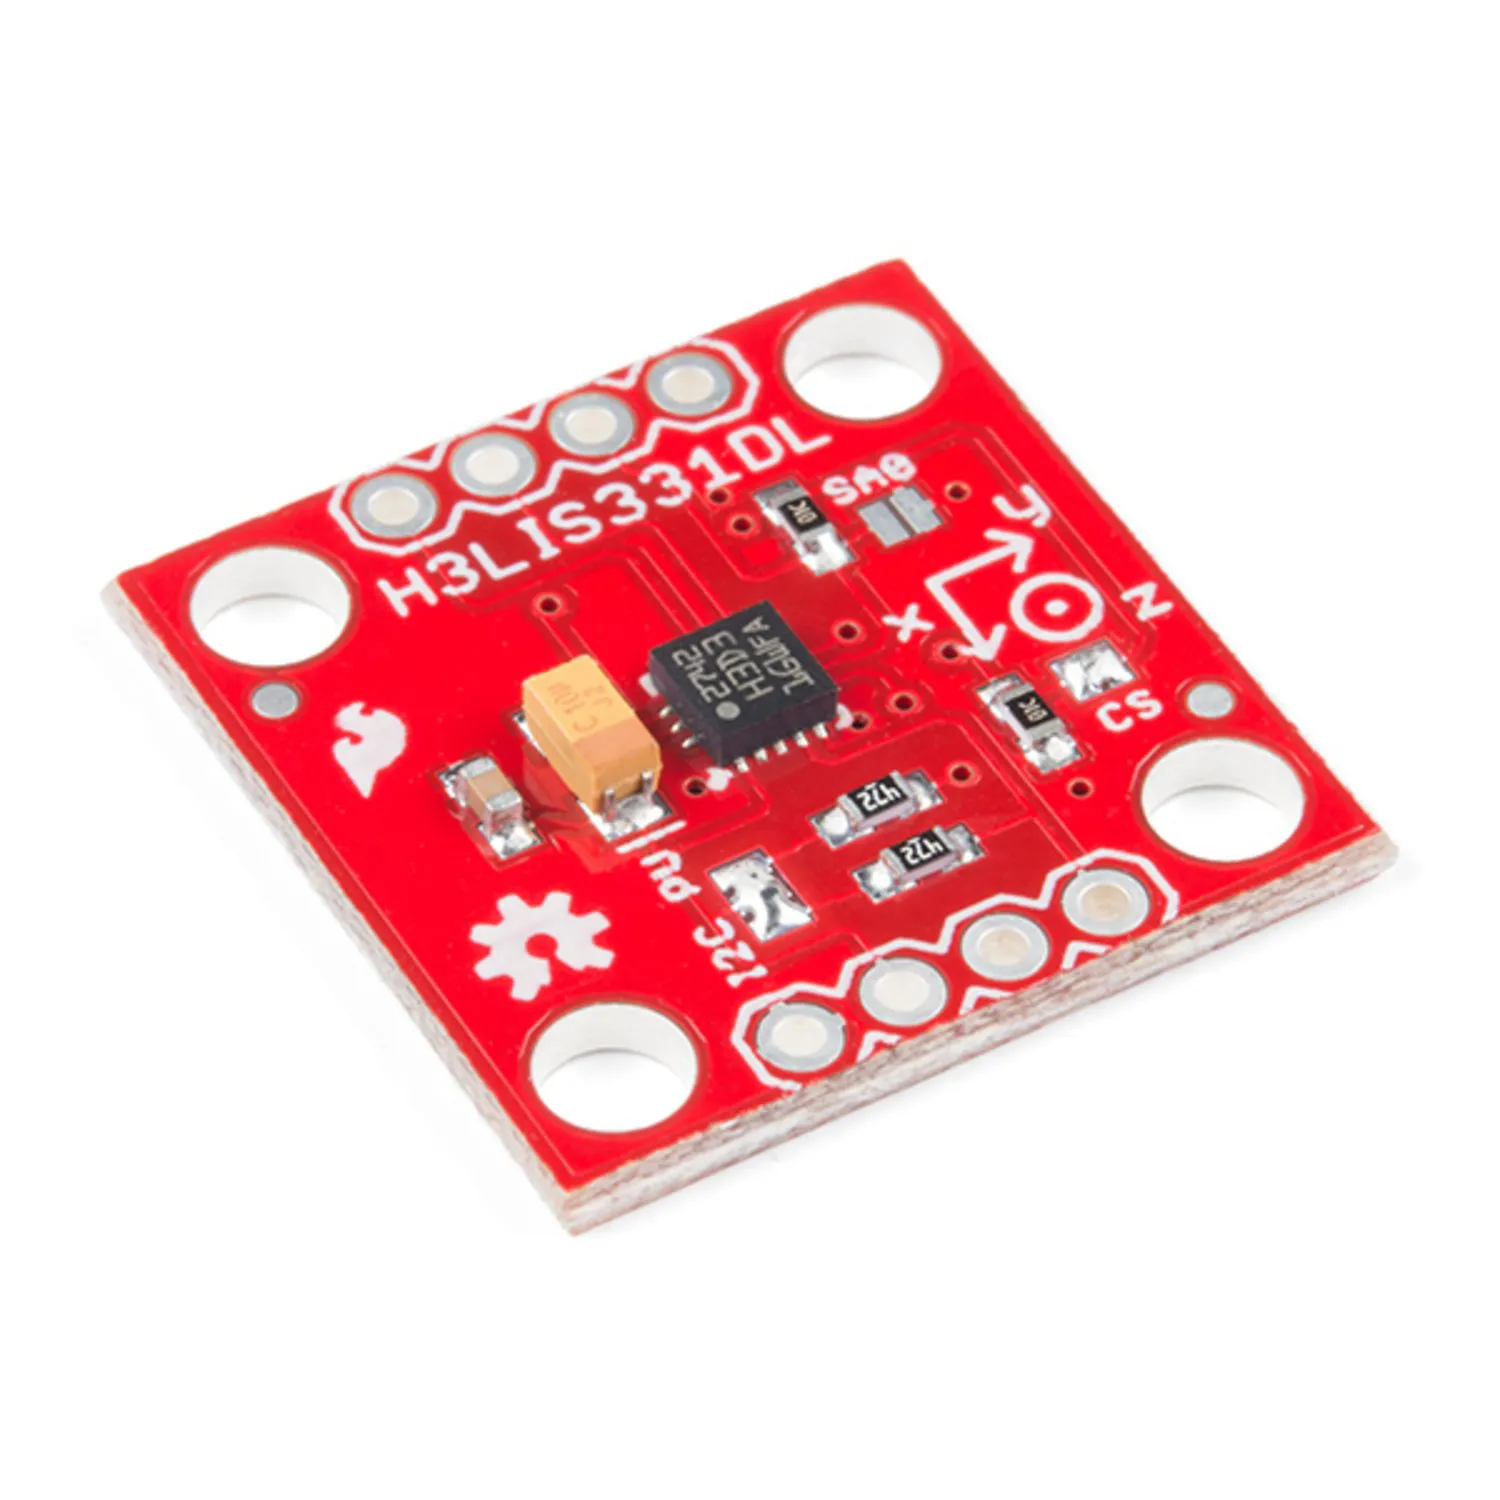 Photo of SparkFun Triple Axis Accelerometer Breakout - H3LIS331DL